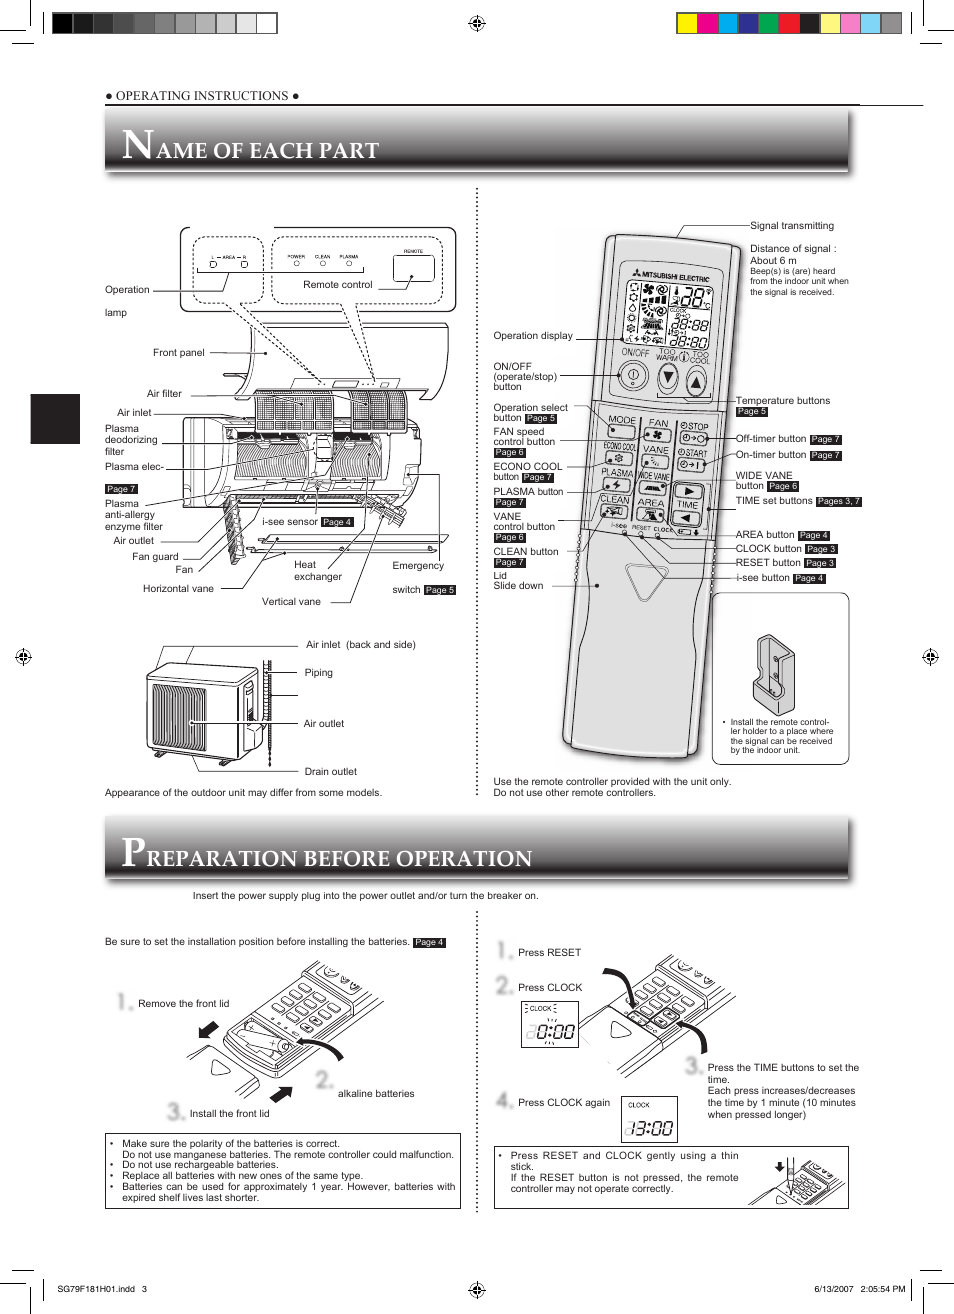 Ame of each part, Reparation before operation 1, Indoor unit remote  controller | MITSUBISHI ELECTRIC MSZ-FD25VA User Manual | Page 4 / 12